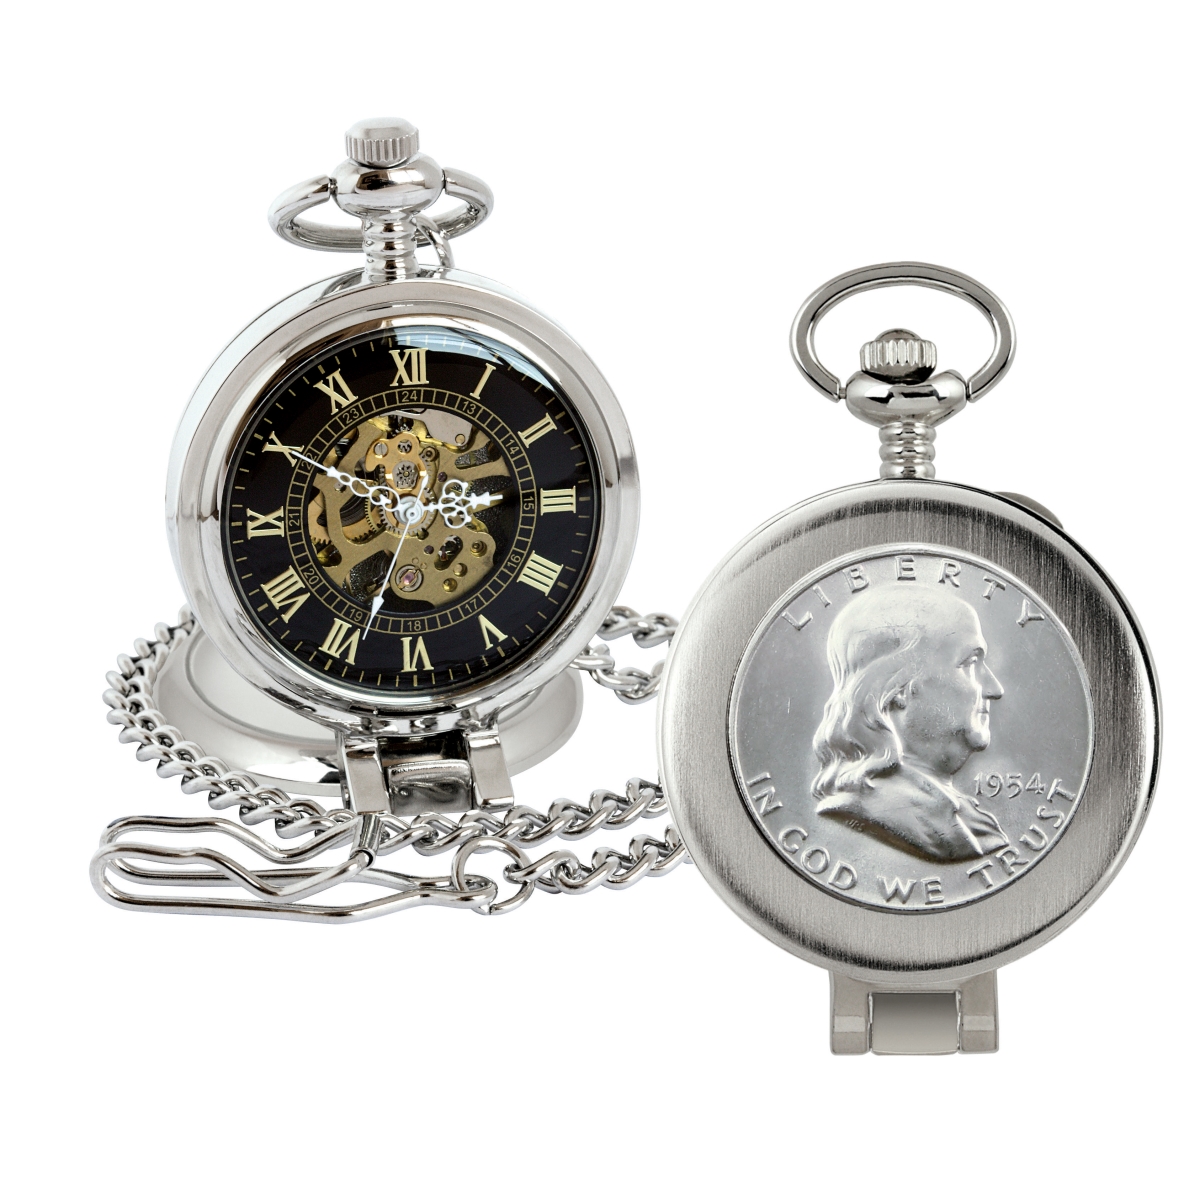 Picture of American Coin Treasures 16270 Silver Franklin Half Dollar Coin Pocket Watch with Skeleton Movement, Black Dial with Gold Roman Numerals - Magnifying Glass